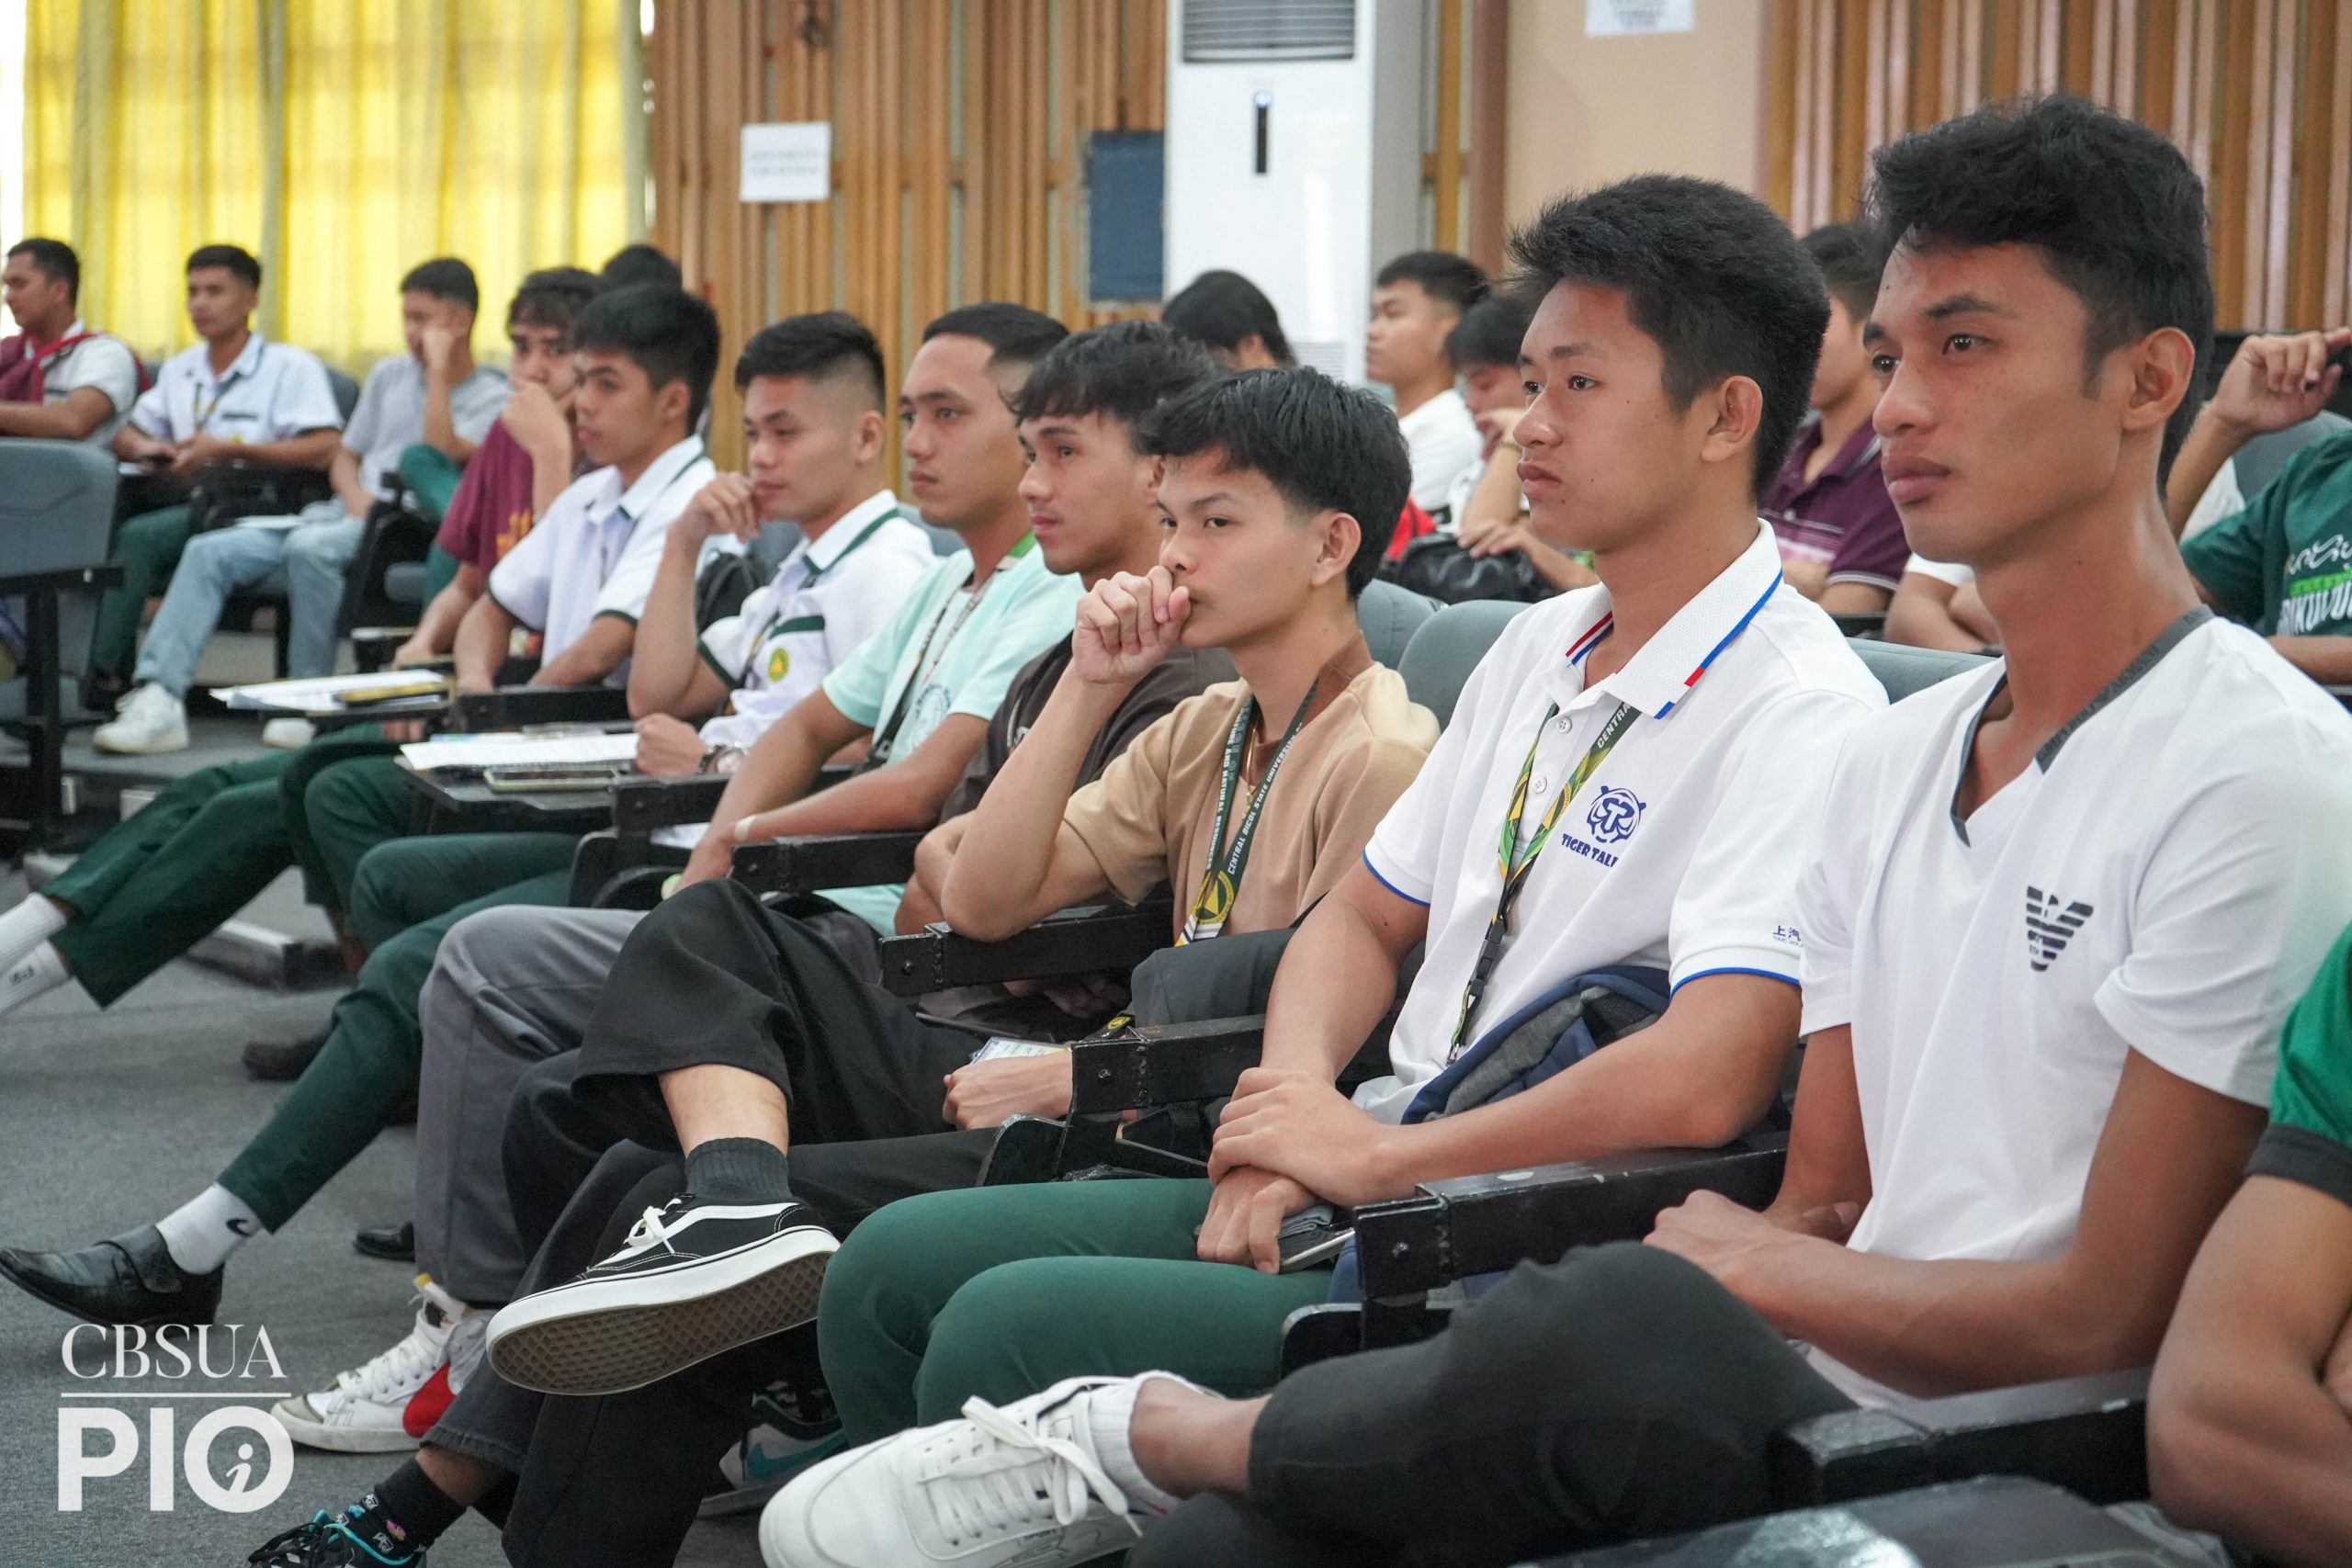 OCA, OSAS-GUIDANCE AND COUNSELING UNIT, PREFECT OF DISCIPLINE ORGANIZE ORIENTATION-SEMINAR FOR STUDENT DORMERS